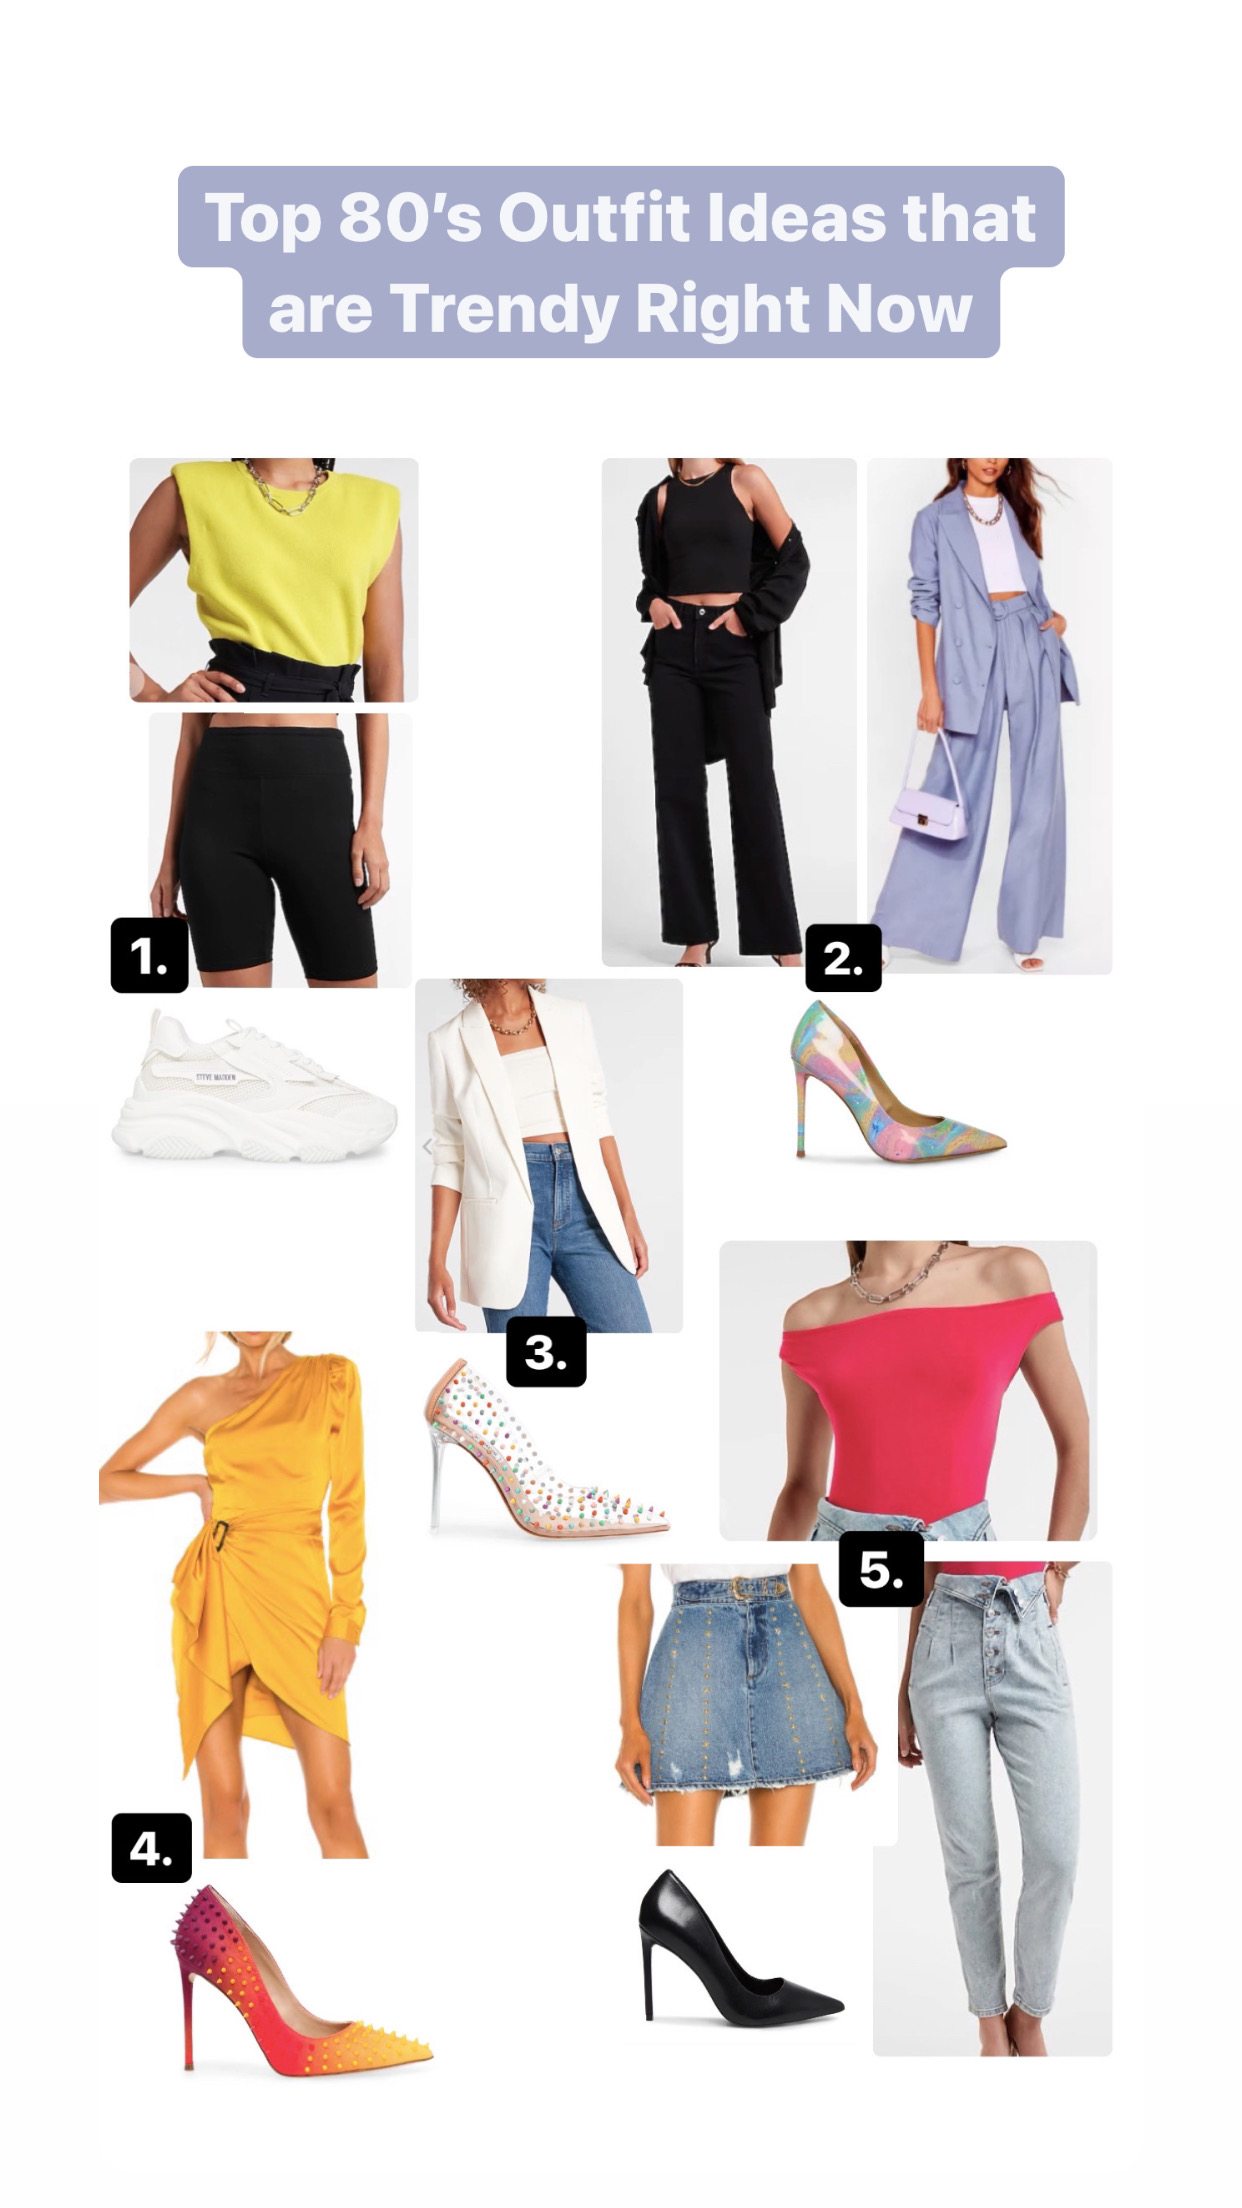 Top Nashville Lifestyle blogger, Nashville Wifestyles shares her Top 80's Outfit Ideas that are Trendy Right Now! Click here to see more!